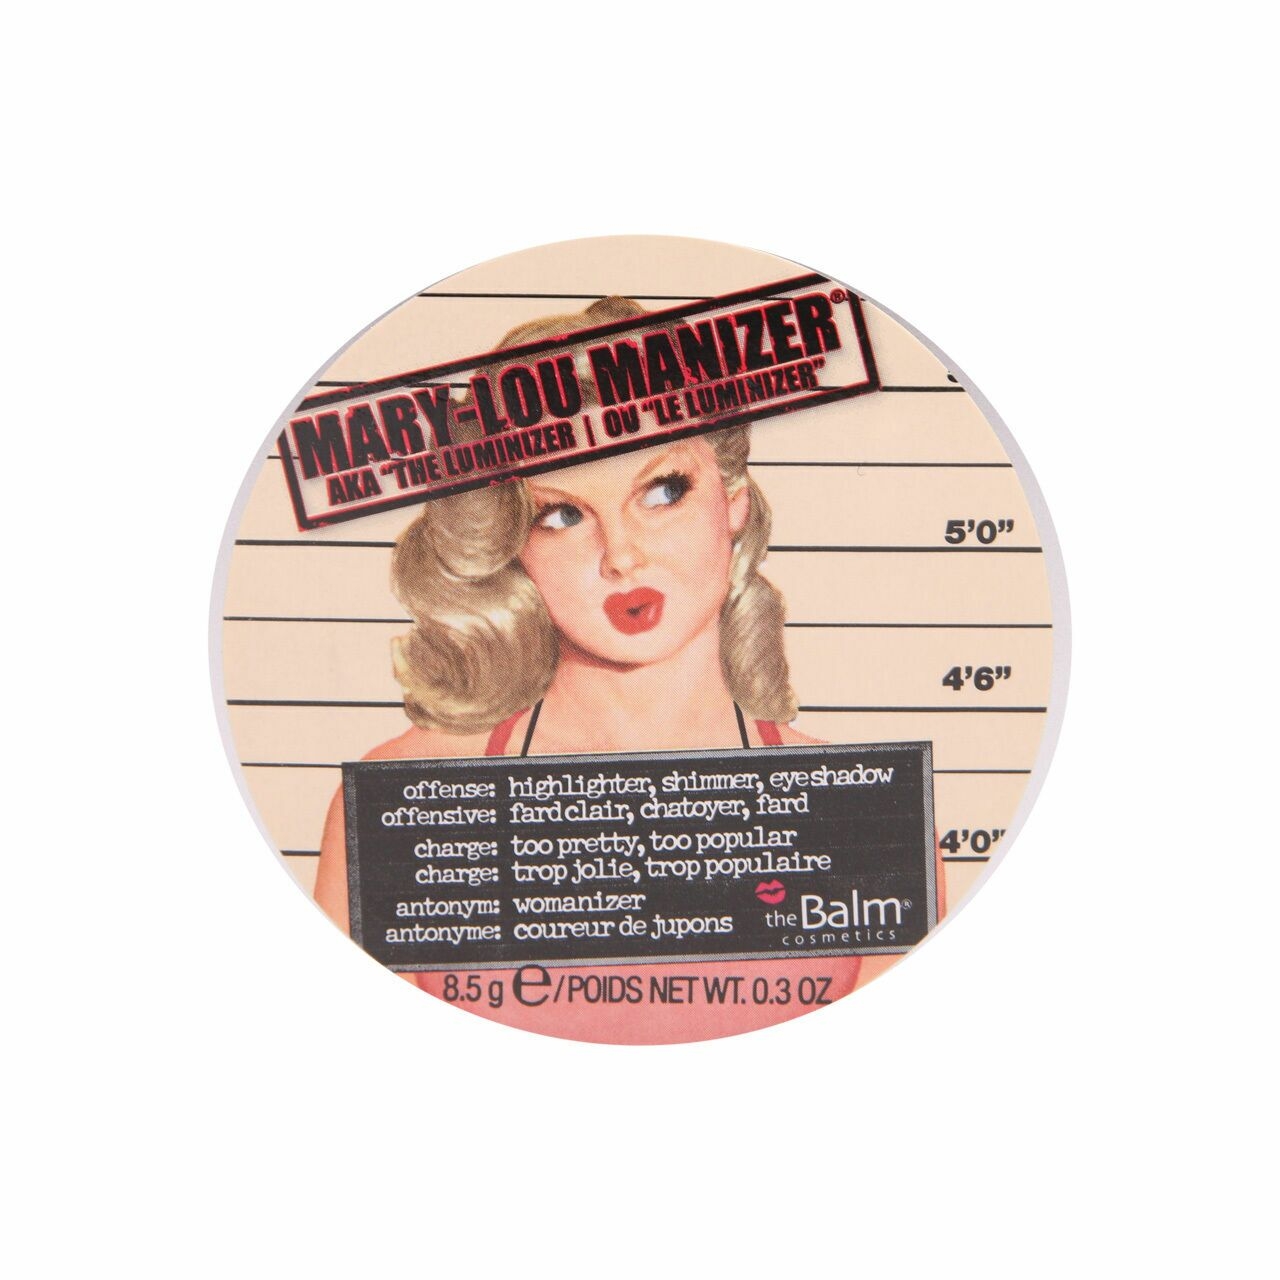 The Balm Mary-Lou Manizer Highlighter, Shimmer, Eyeshadow Faces